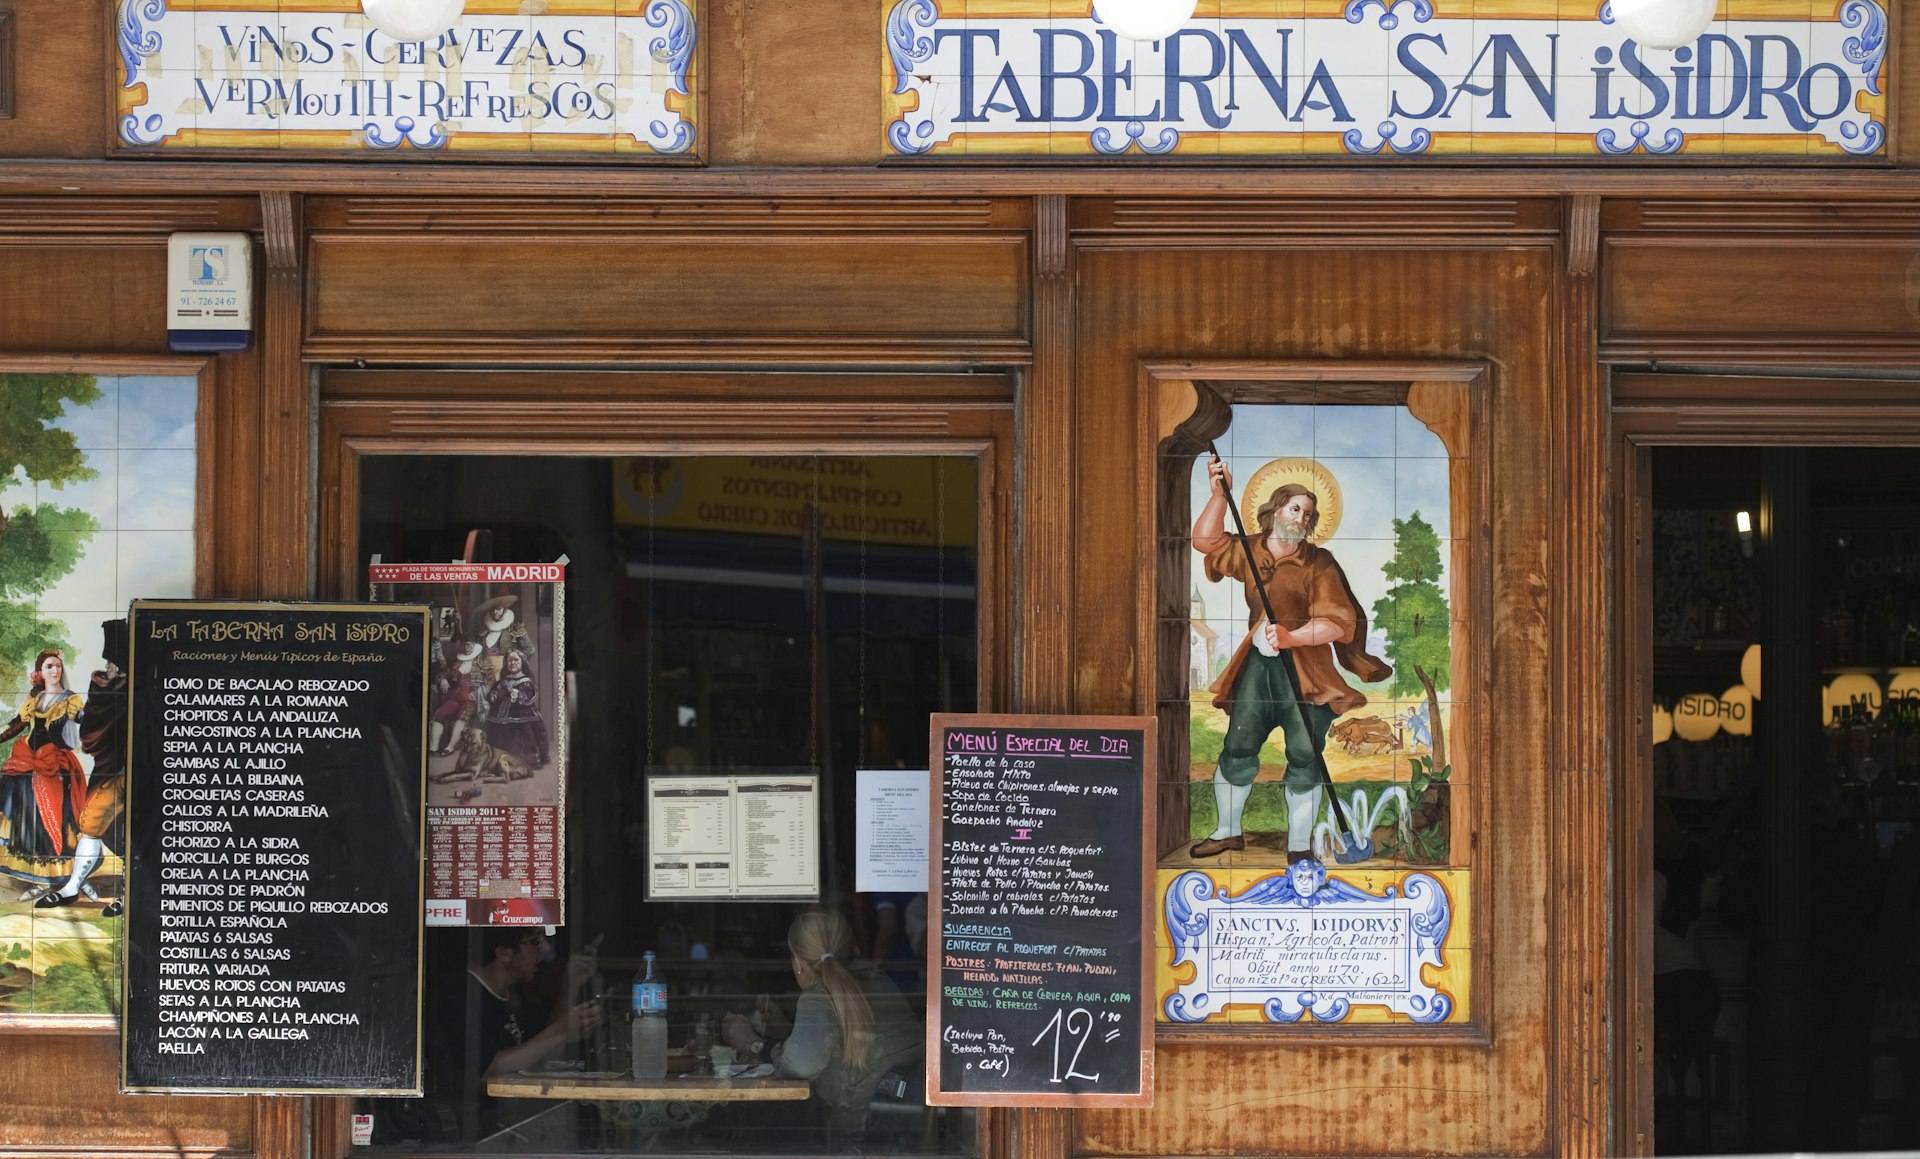 Front view of Taberna de San Isidro, a popular old-style tavern with tile decoration, traditional food and chalkboard menus out front and people seen dining in the front window